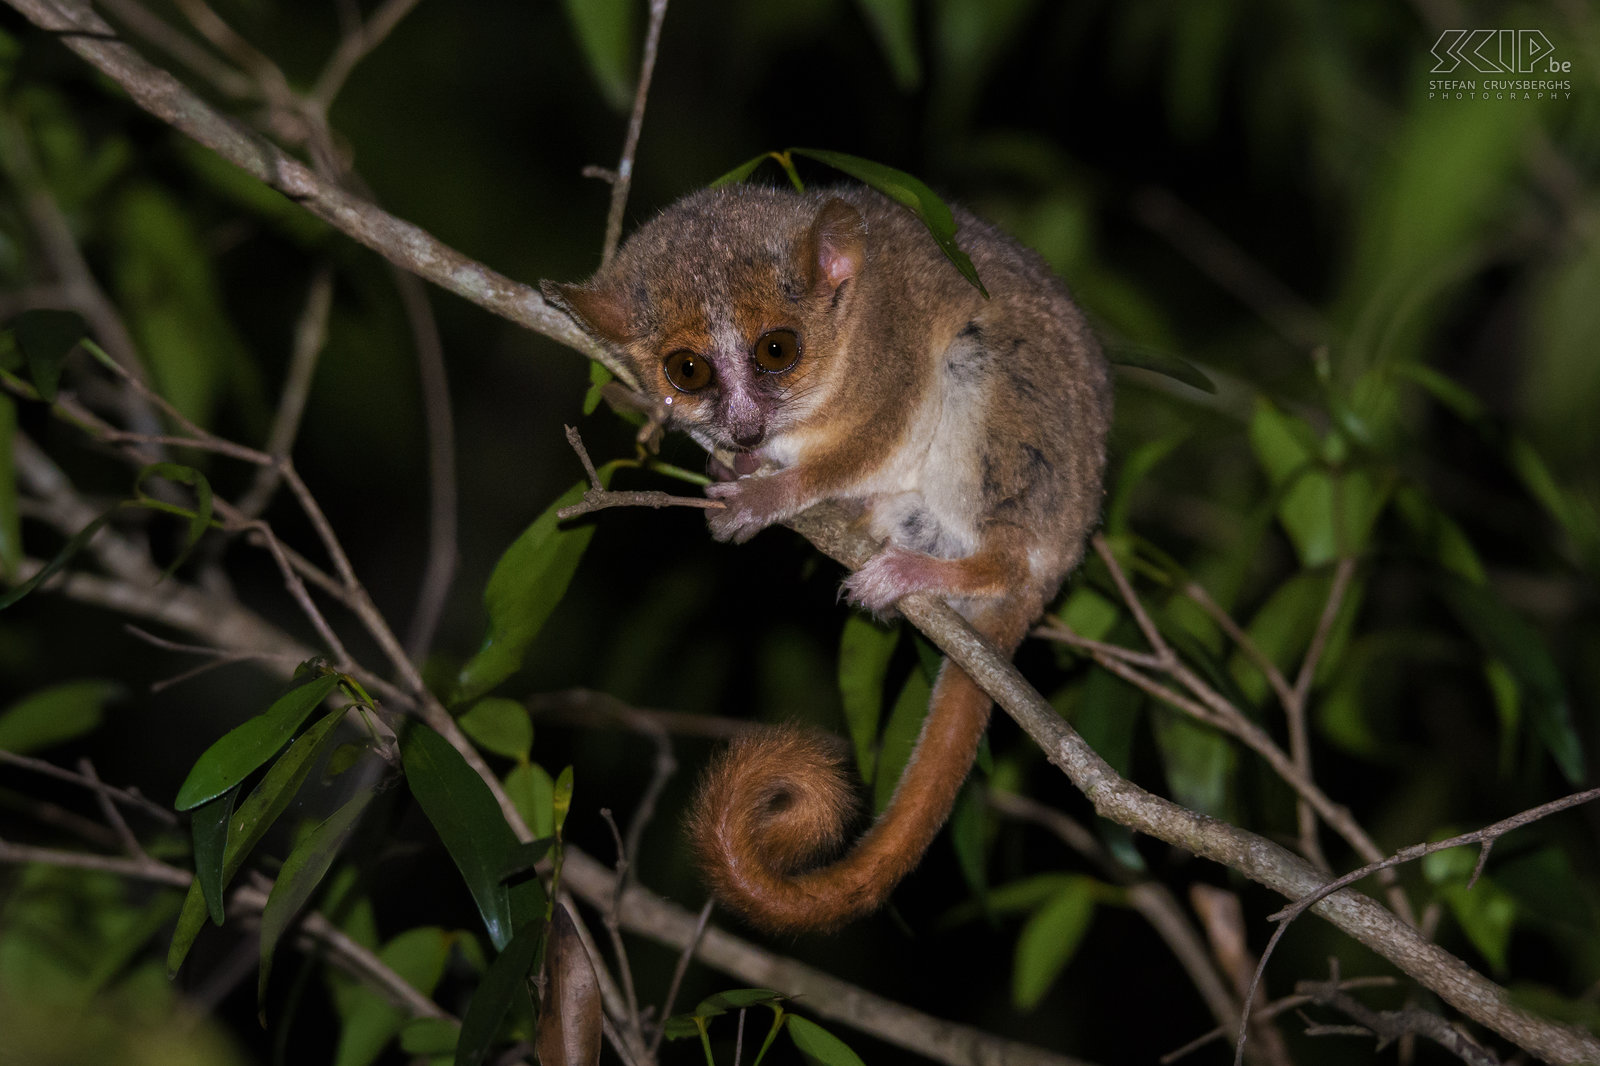 Kirindy - Gray mouse lemur The gray mouse lemur (Microcebus murinus) is not only the smallest lemur but also one of the smallest primates in the world. They weigh 58 to 67 grams and they are nocturnal. We spotted several ones during our night walk in Kirindy Forest. Stefan Cruysberghs